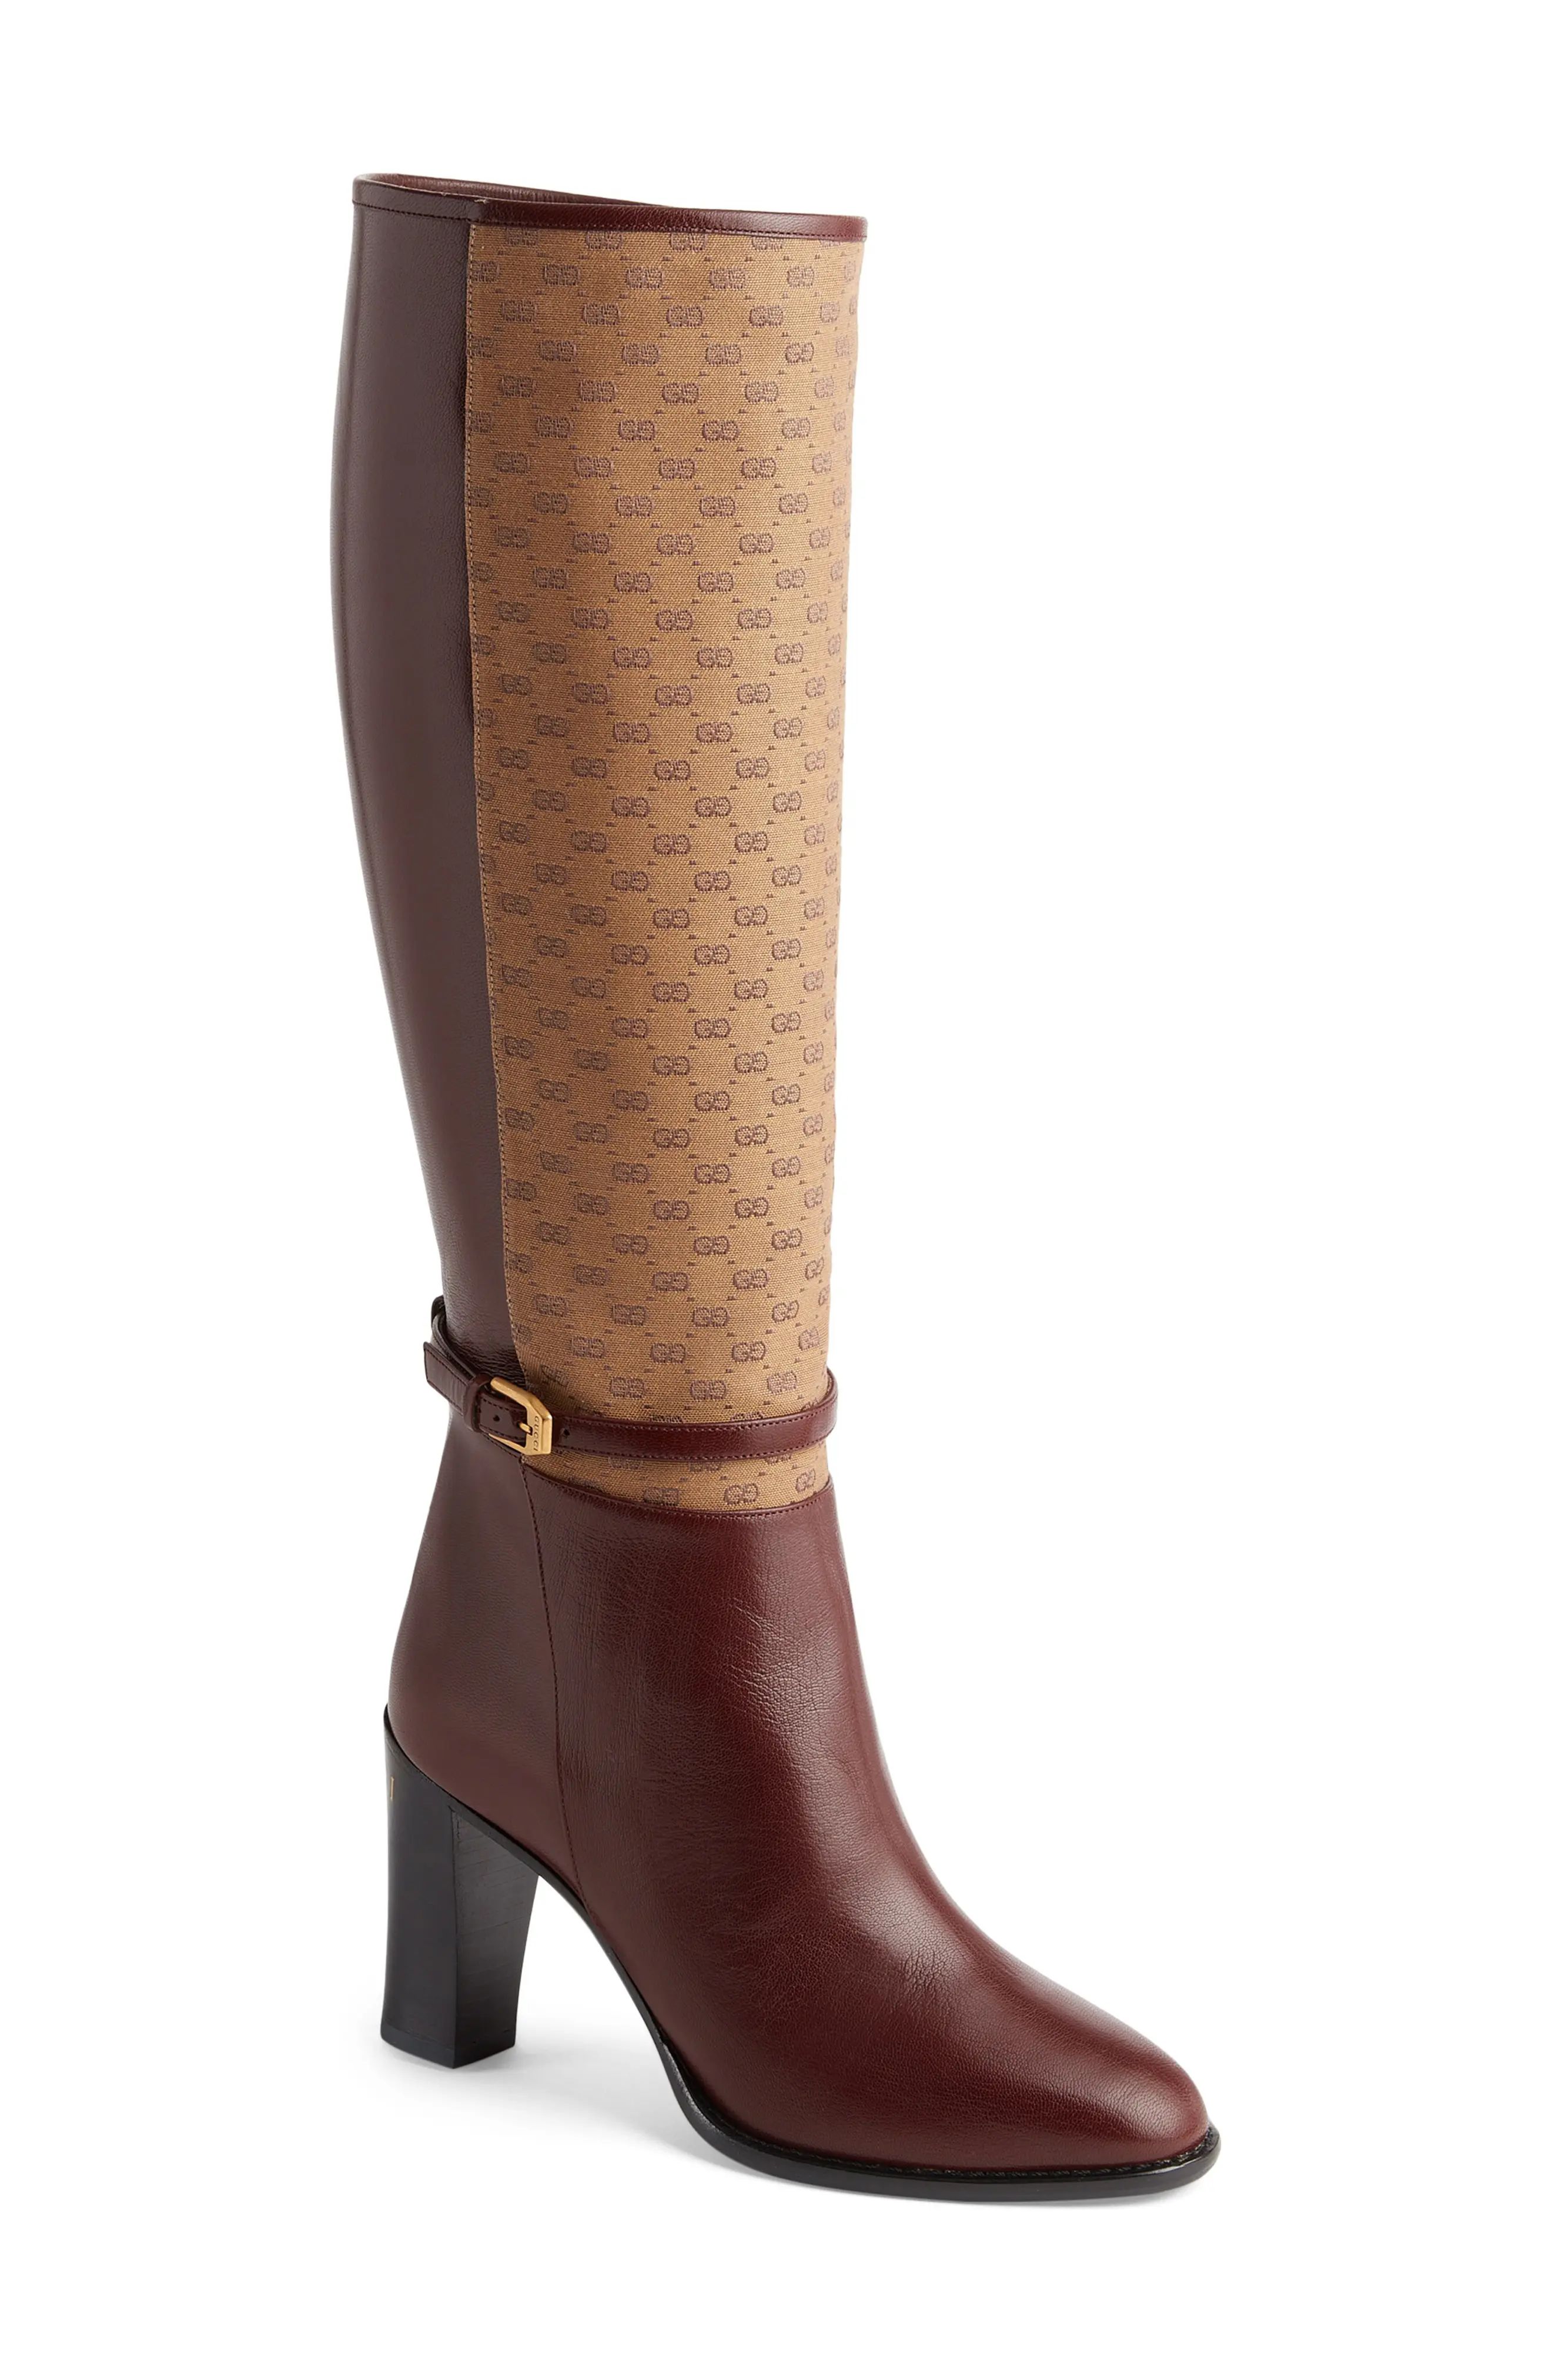 Gucci Finn Mixed Media Tall Boot, Size 12Us in Vintage Bordeaux/Dark Brown at Nordstrom | Nordstrom